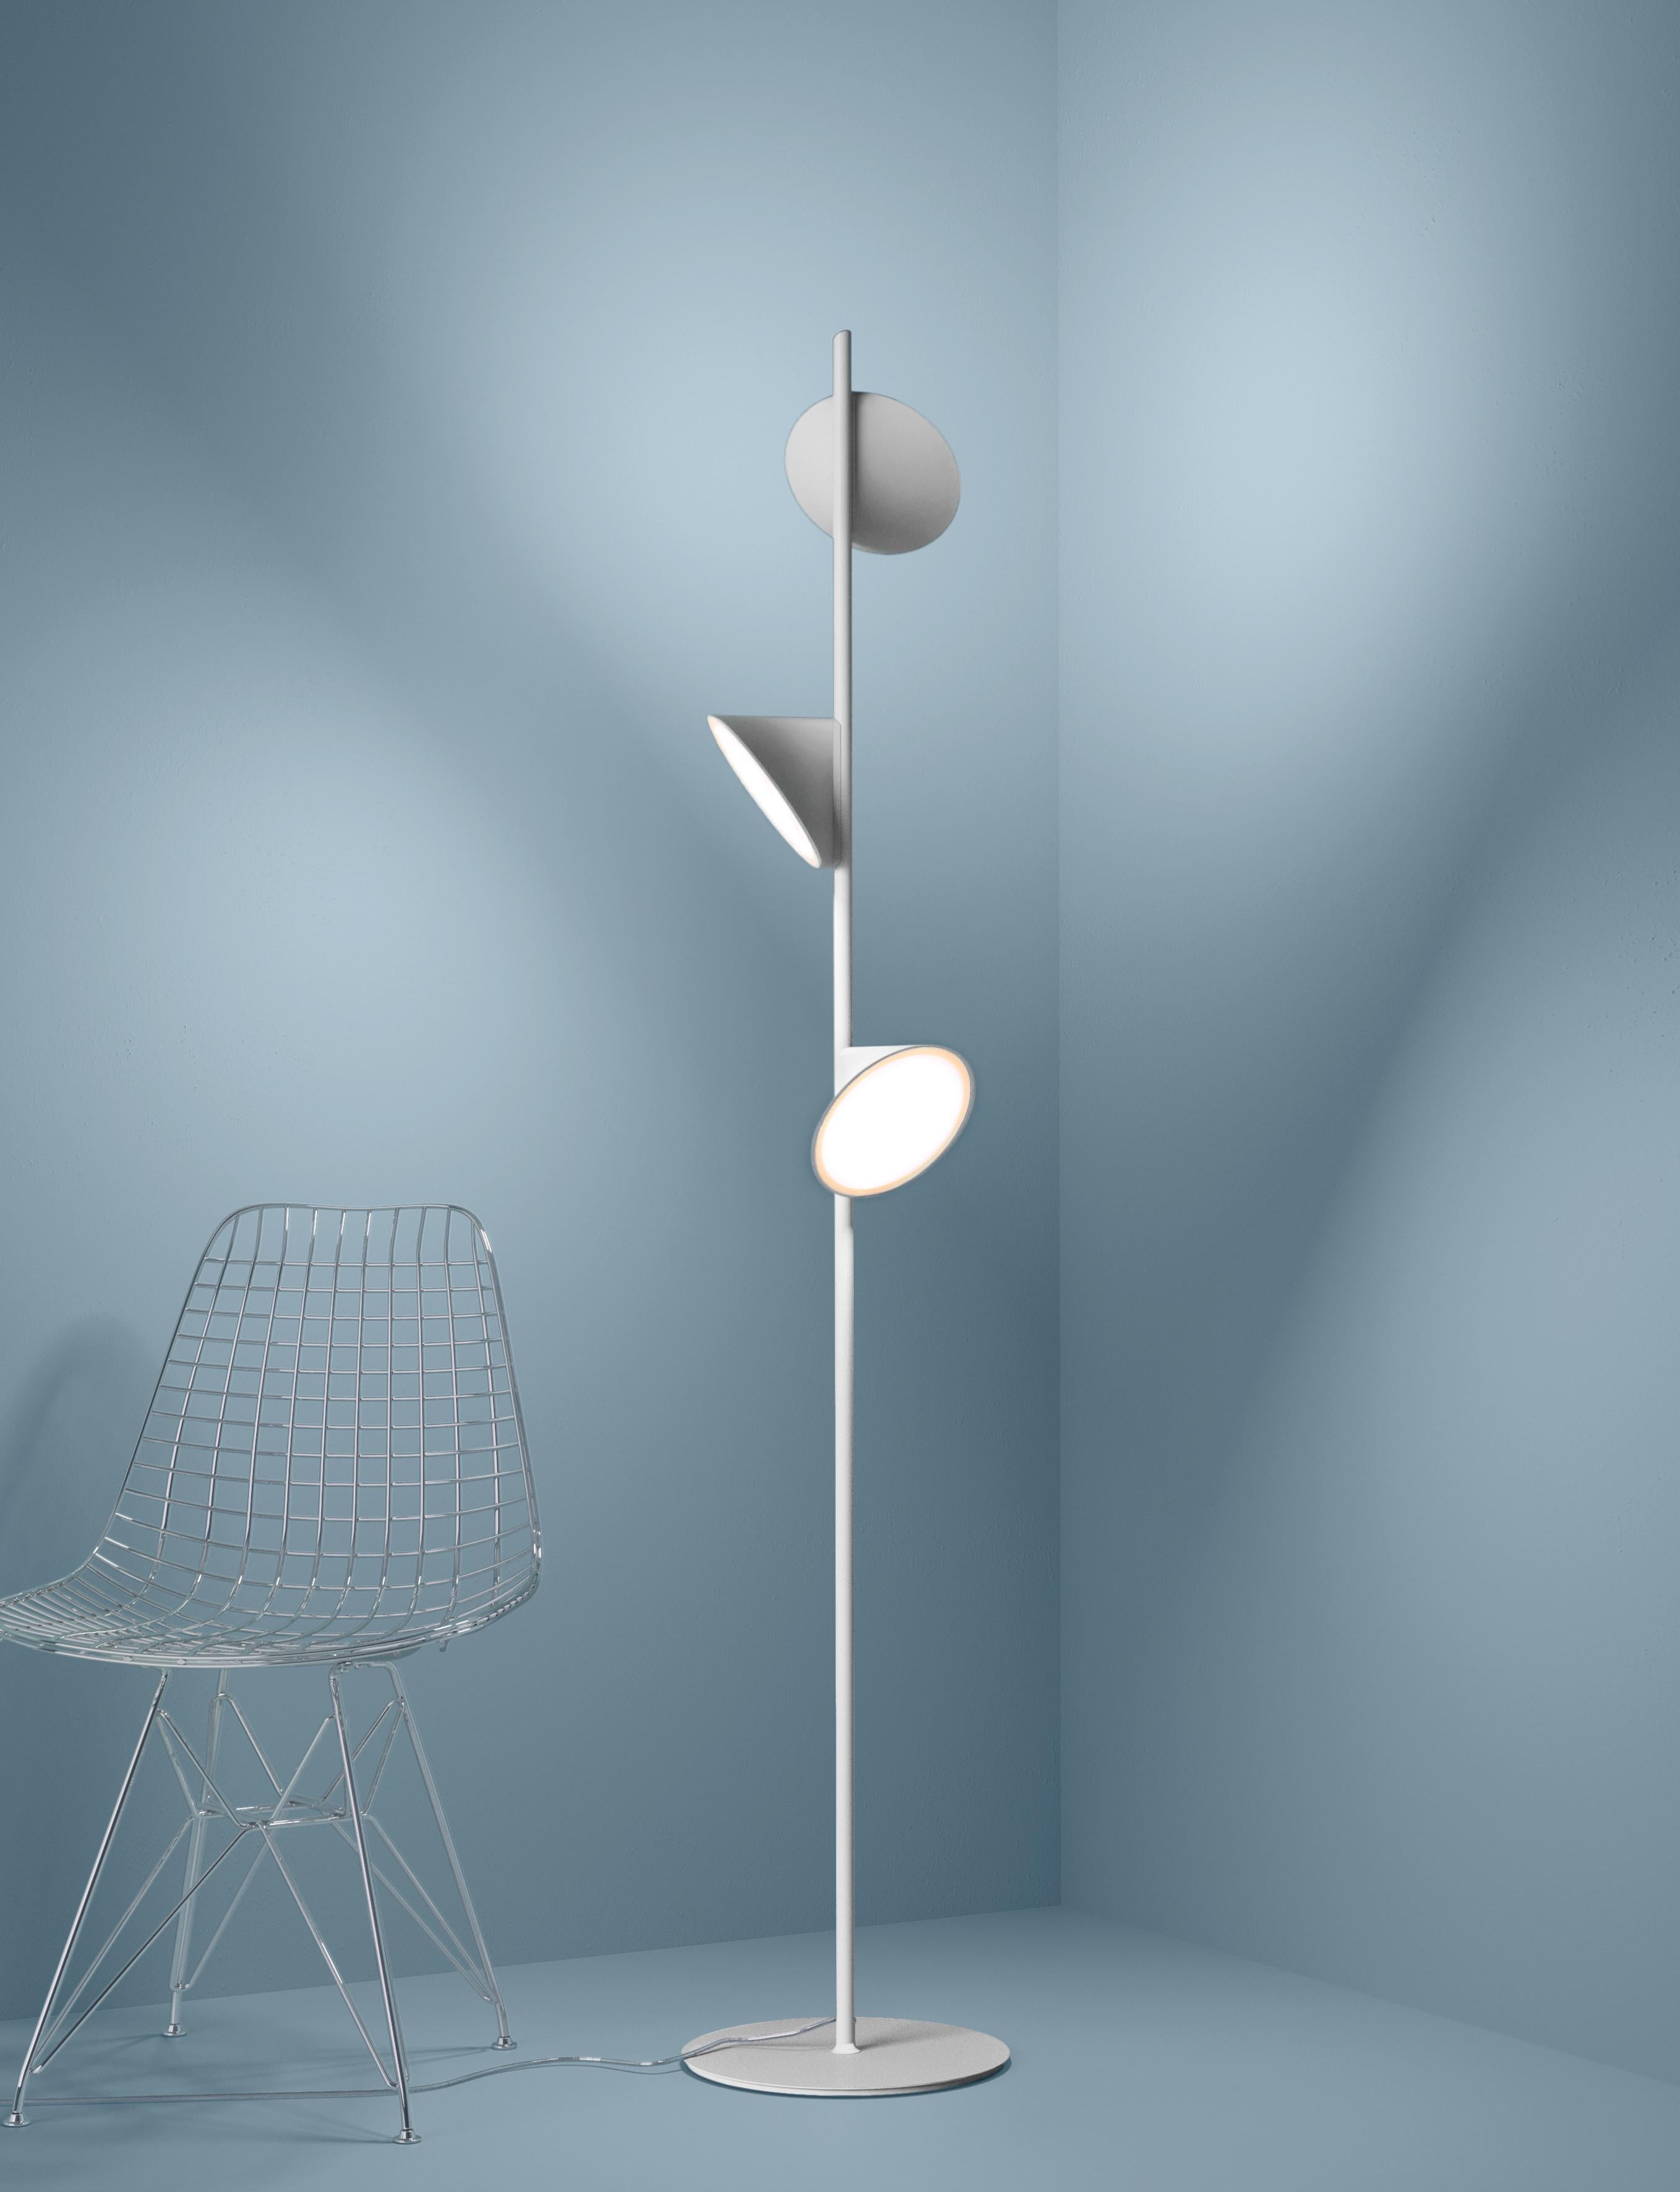 Axolight Orchid Floor Lamp with Die Cast Aluminum Body in White by Rainer Mutsch

Orchid design expresses the enchantment of nature with its splendid stems and buds. Direct light beams like rays of sun and intense diffused glow to gracefully